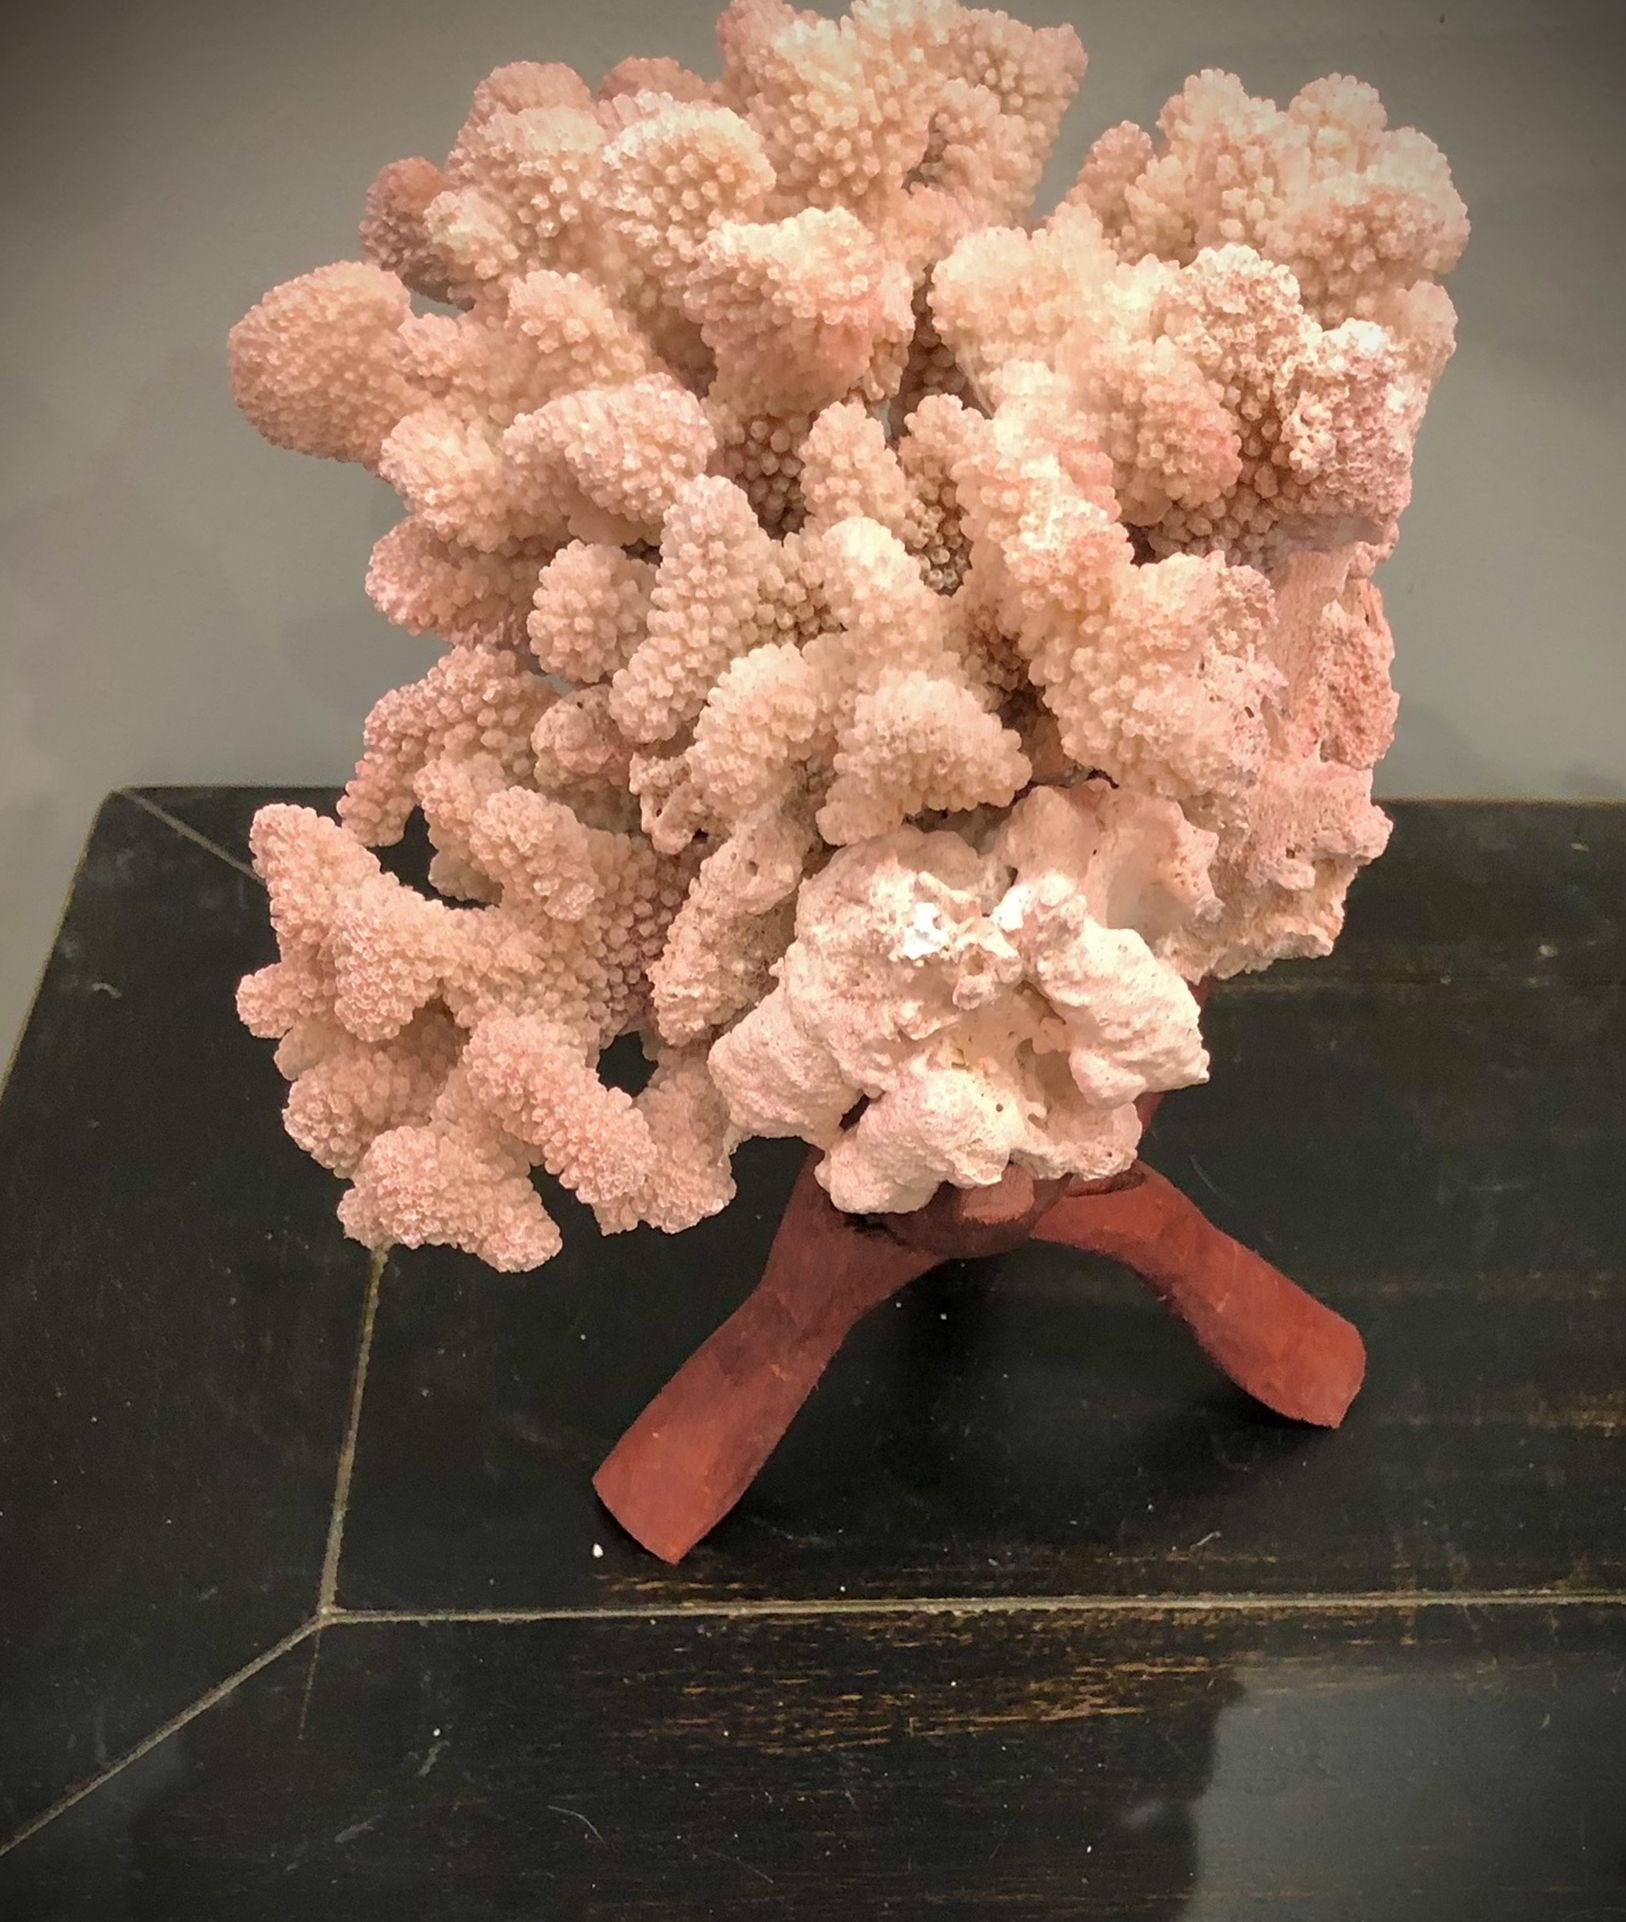 Large Cats Paw Coral Piece With Pinkish Tint